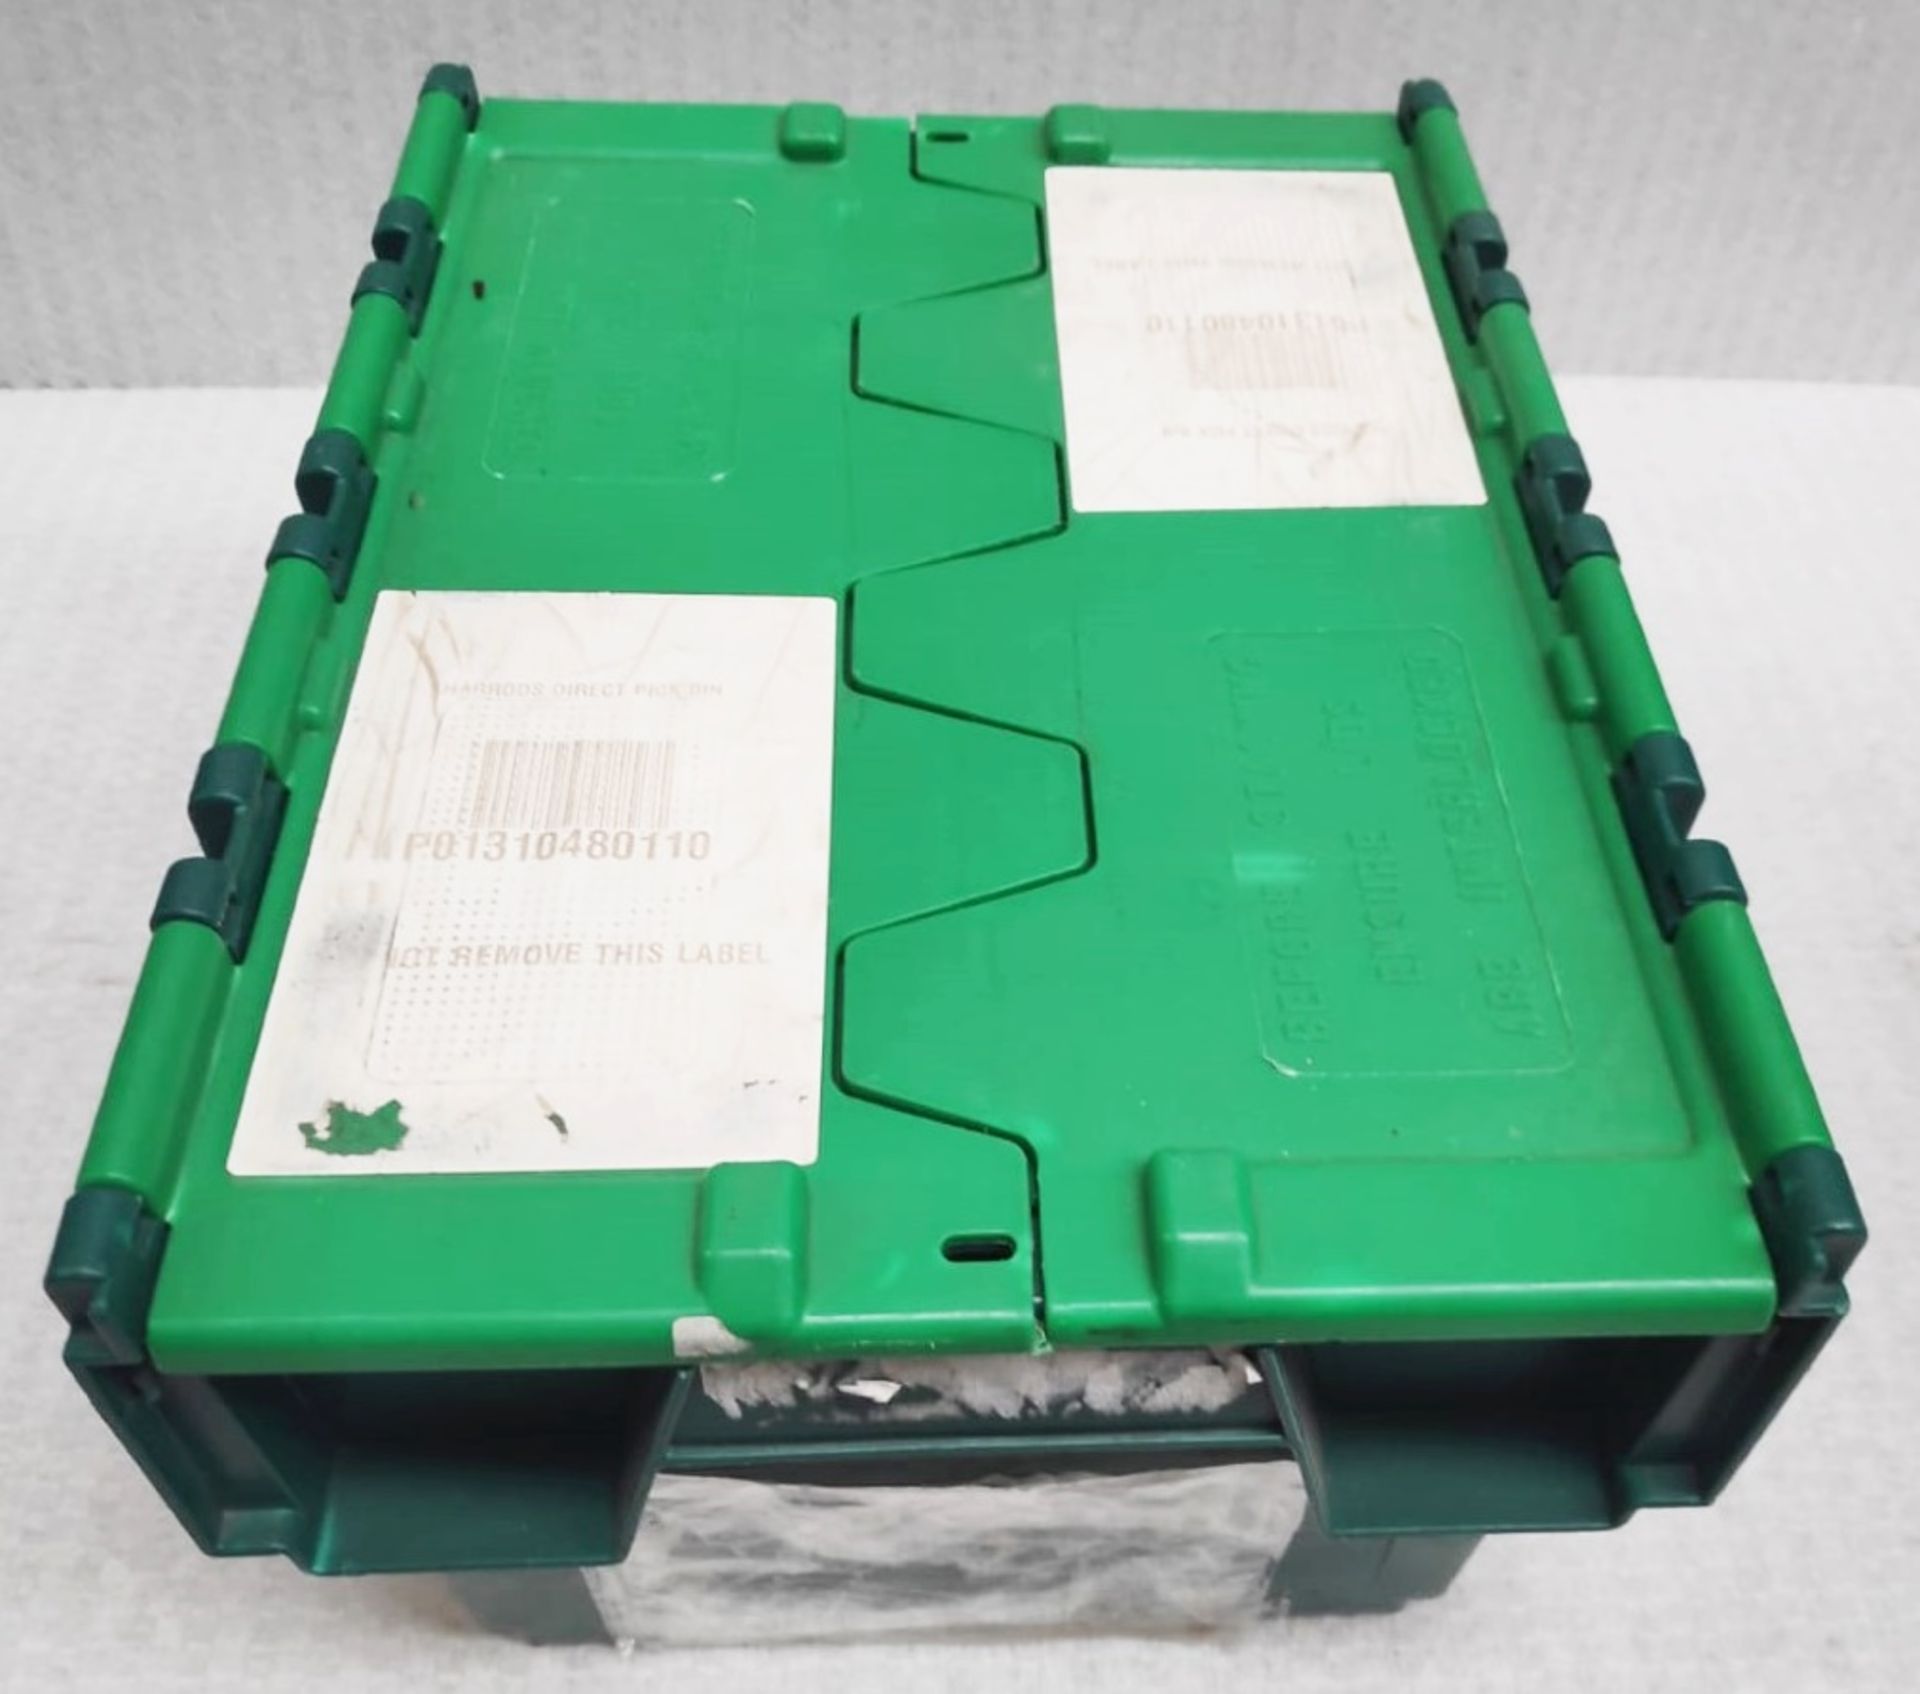 20 x Robust Compact Green Plastic Stackable Secure Storage Boxes With Attached Hinged Lids - Image 3 of 6